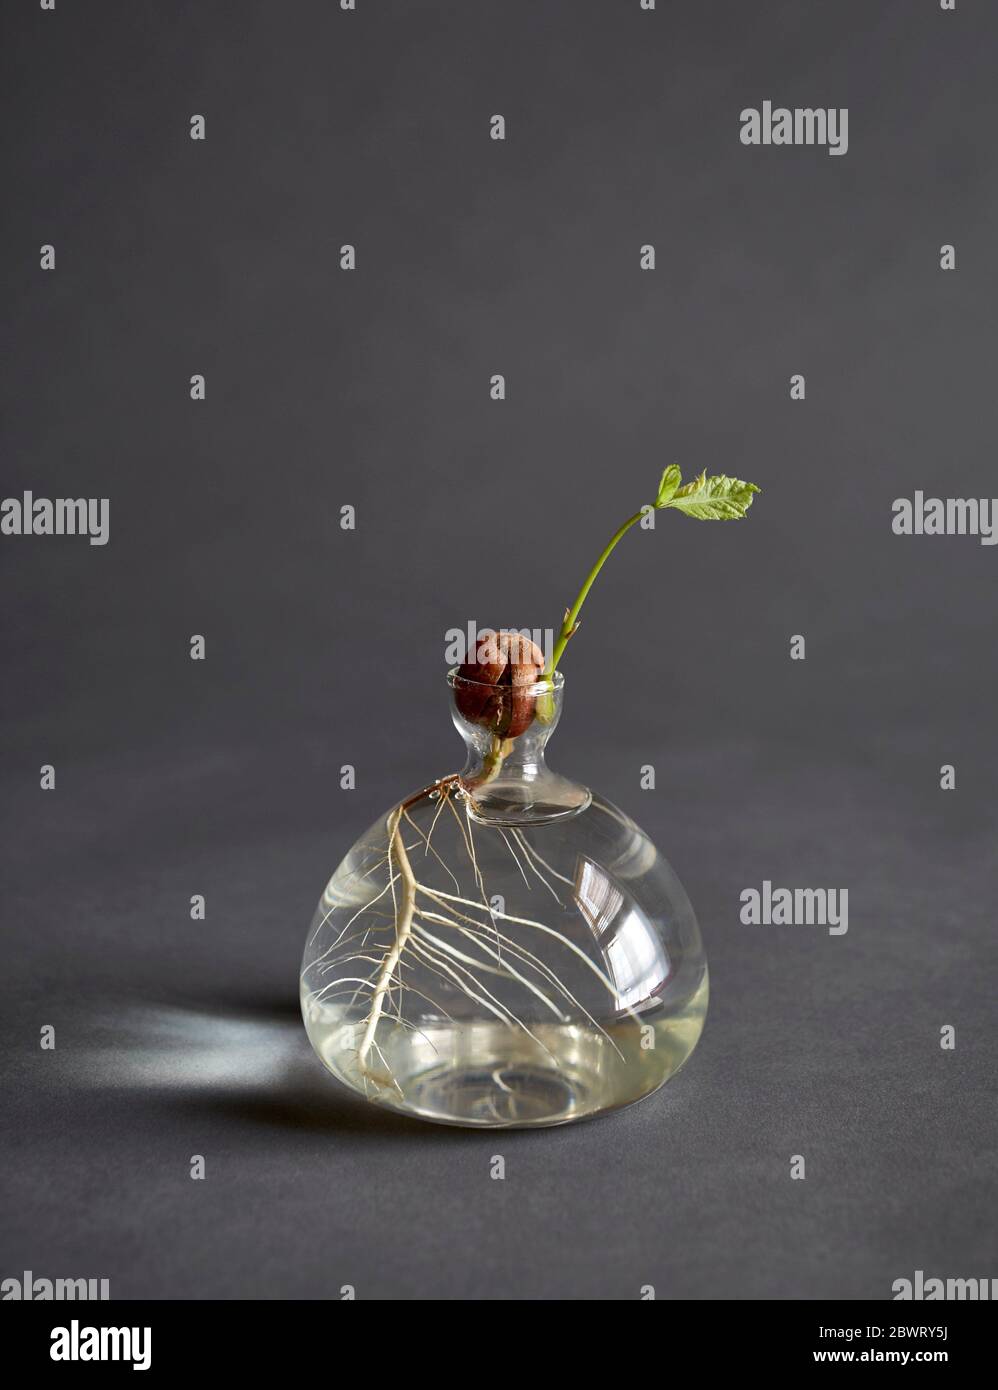 A clear glass vase holding water and growing an oak tree from a seedling. Stock Photo